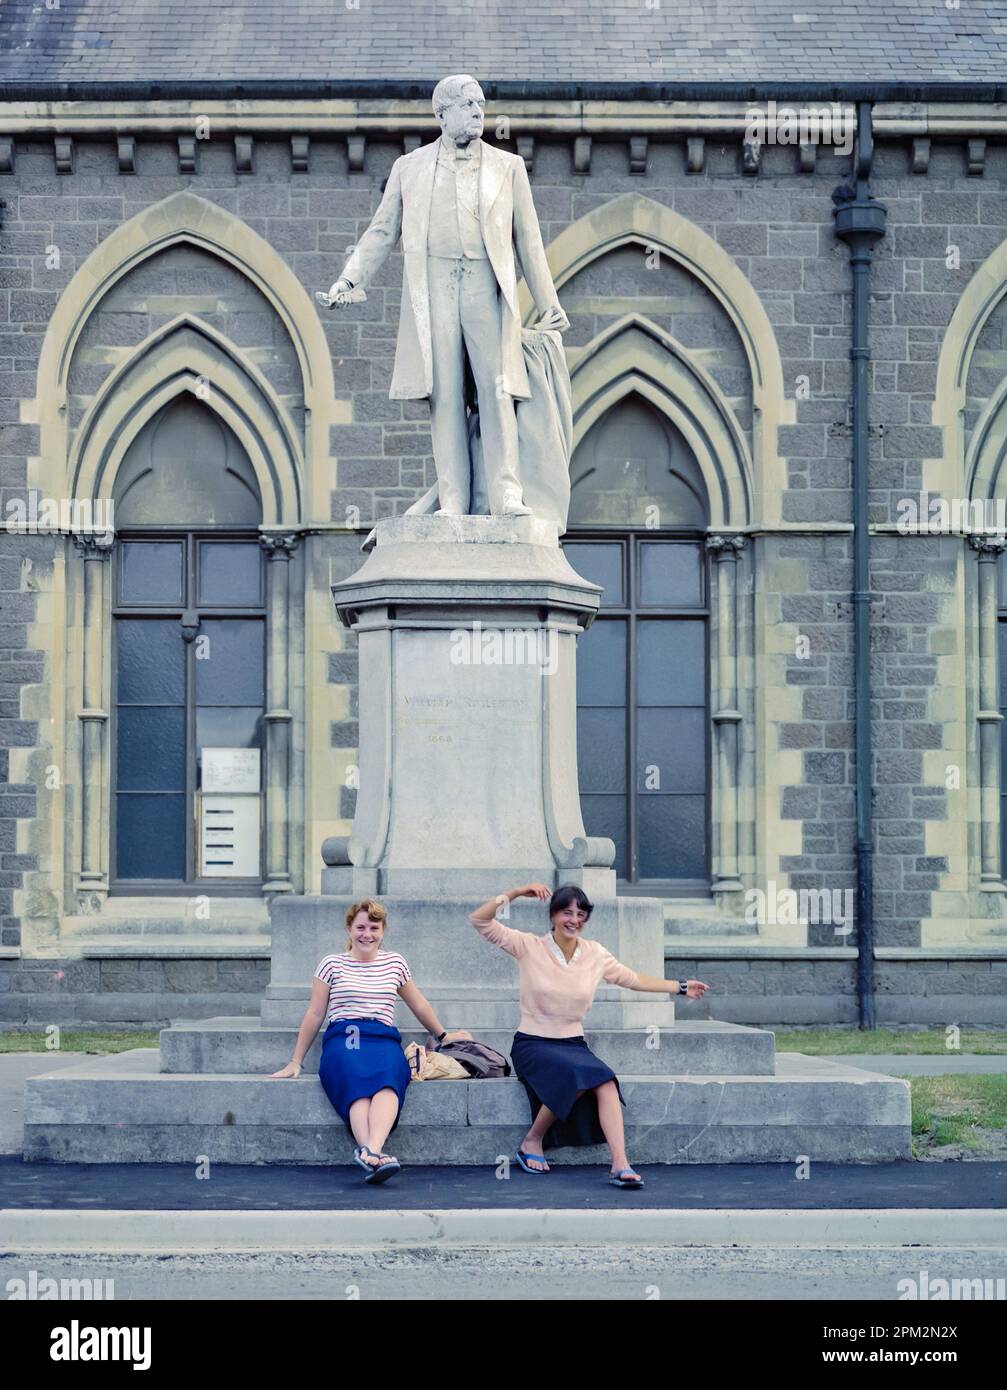 A 1981 historic image of two young women waving and play-acting at the base of the William Rolleston statue outside the Canterbury Museum in the city of Christchurch on the south island of New Zealand. In the 2011 Christchurch earthquake, the statue toppled off its plinth and was damaged but it was repaired and reinstated in 2016. Stock Photo